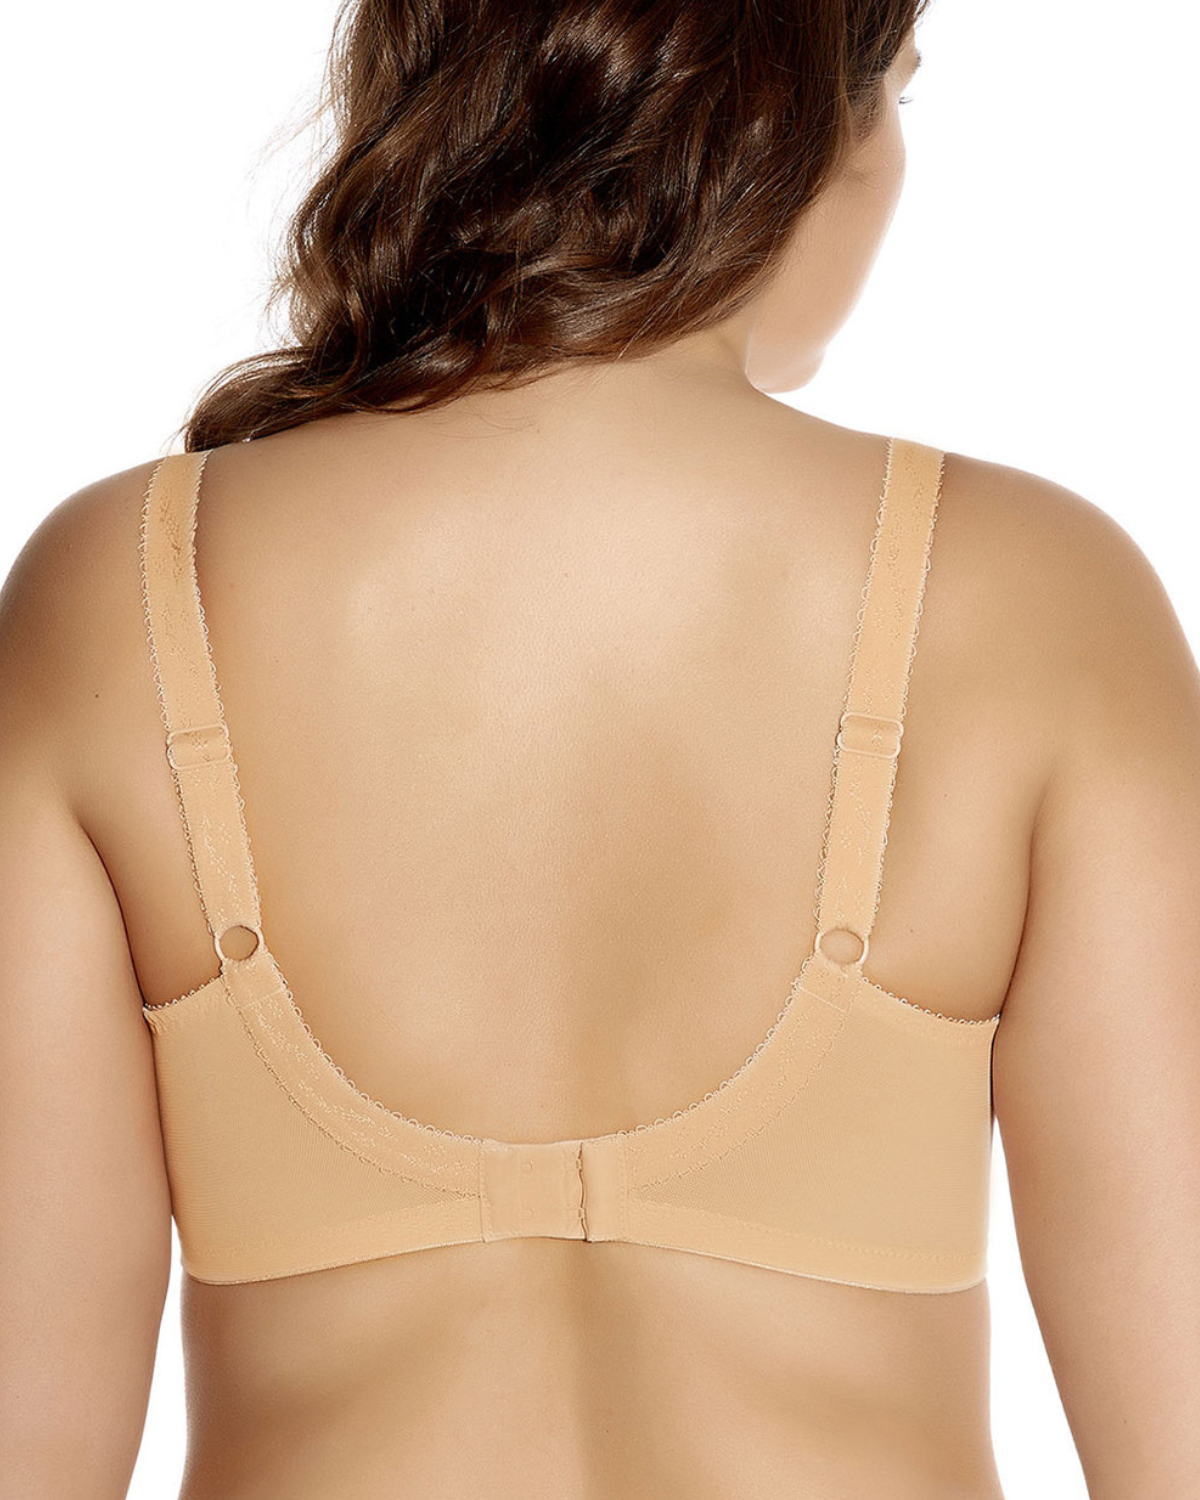 Model wearing a cut and sew banded underwire bra in nude